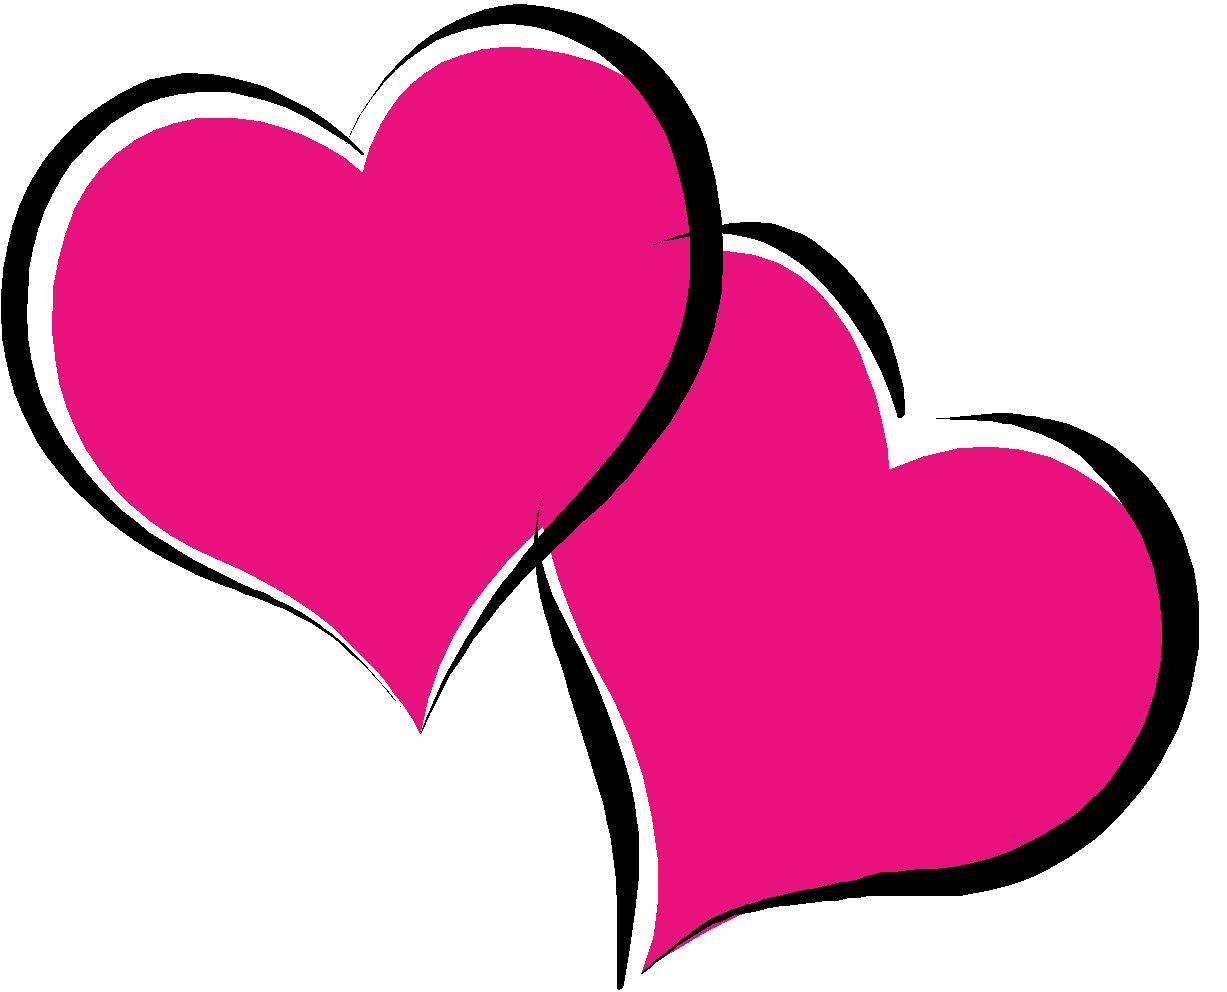 Double hearts clip art | Clipart library - Free Clipart Images